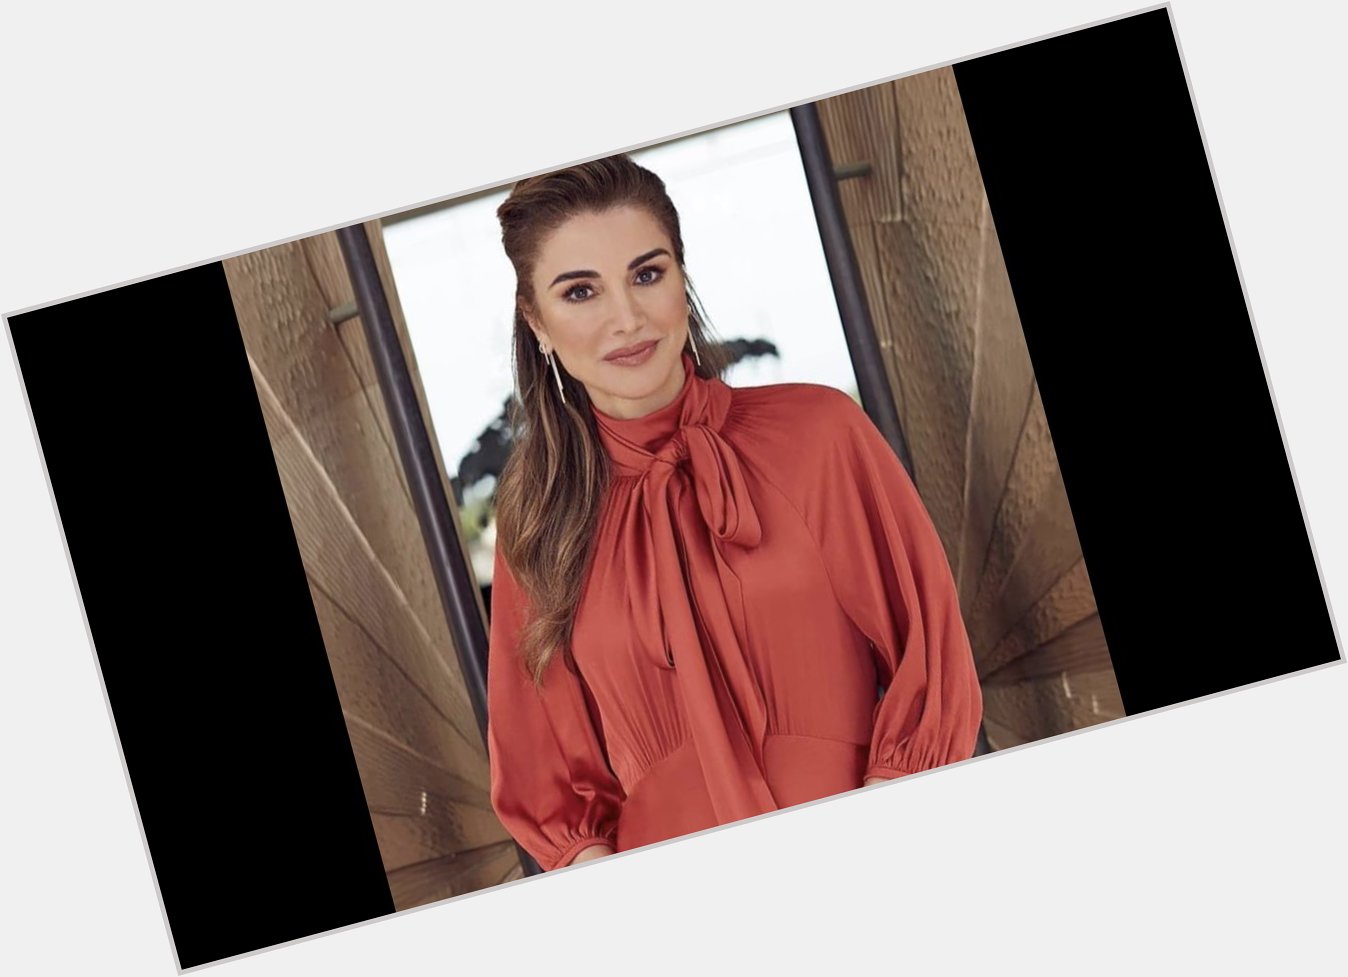 Happy birthday Queen Rania
Wish you all the best  